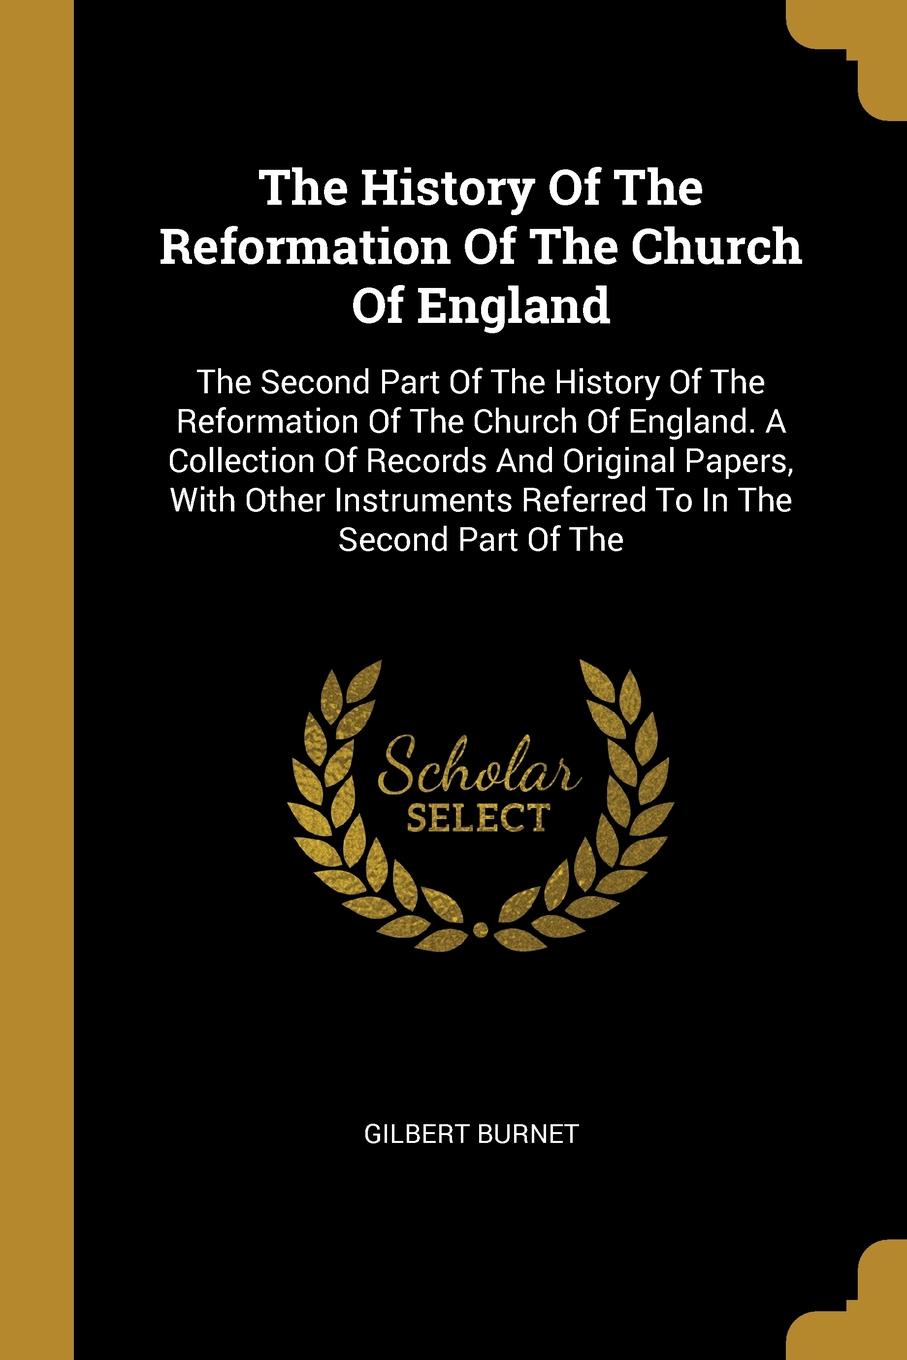 The History Of The Reformation Of The Church Of England. The Second Part Of The History Of The Reformation Of The Church Of England. A Collection Of Records And Original Papers, With Other Instruments Referred To In The Second Part Of The